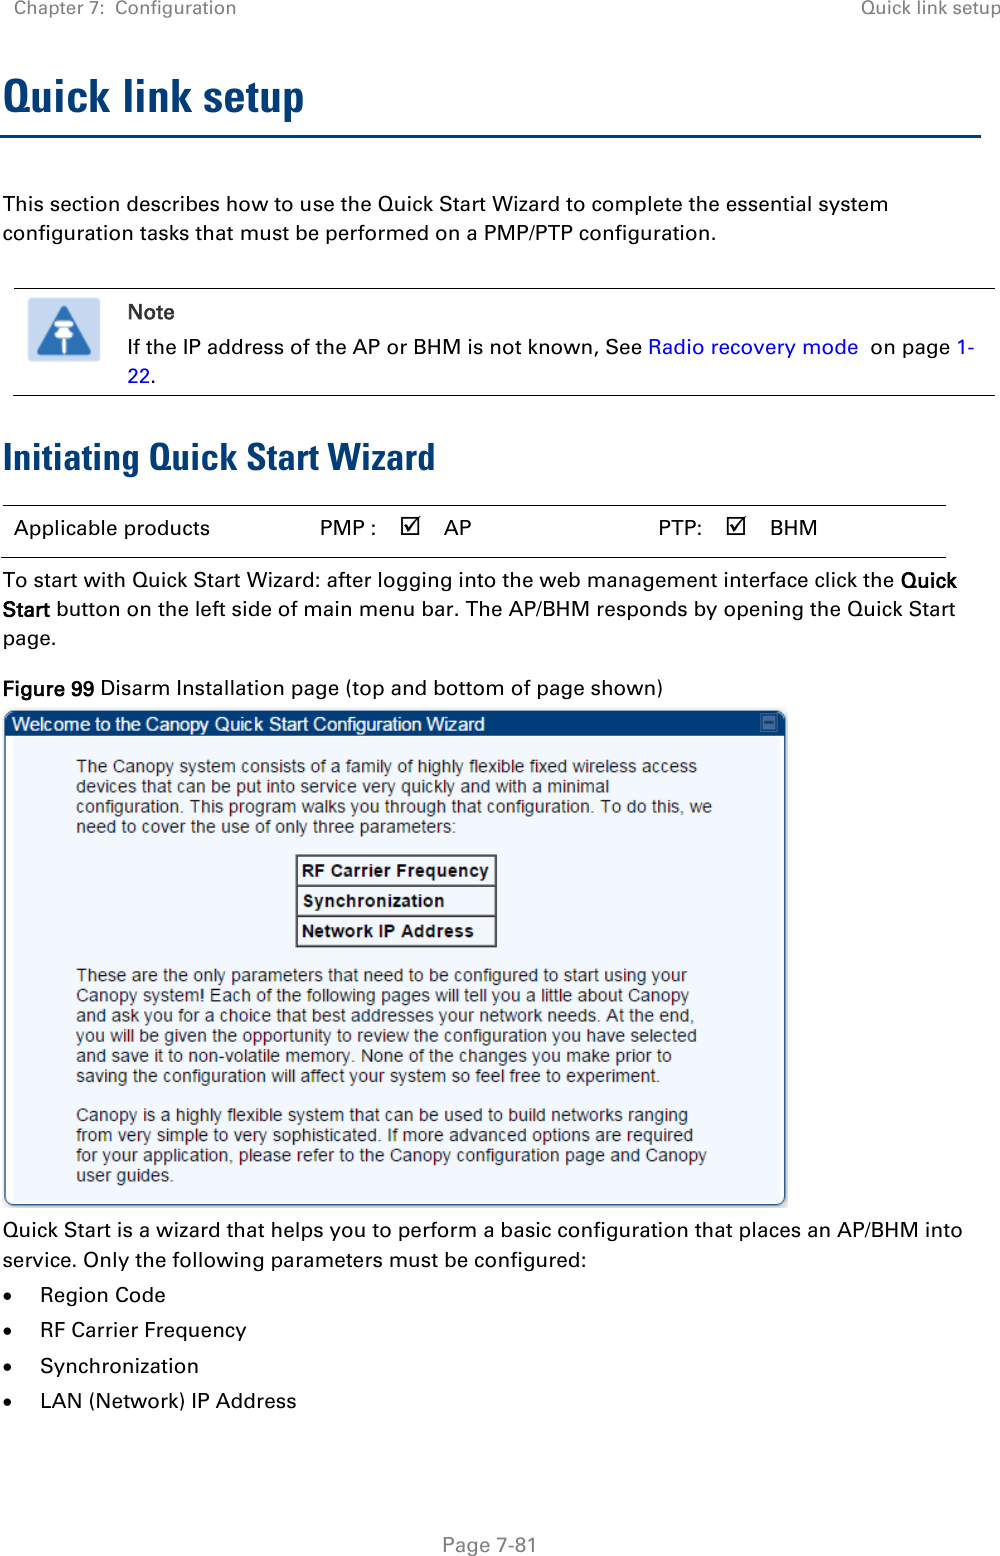 Chapter 7:  Configuration Quick link setup   Page 7-81 Quick link setup This section describes how to use the Quick Start Wizard to complete the essential system configuration tasks that must be performed on a PMP/PTP configuration.   Note If the IP address of the AP or BHM is not known, See Radio recovery mode  on page 1-22. Initiating Quick Start Wizard Applicable products PMP :  AP   PTP:  BHM   To start with Quick Start Wizard: after logging into the web management interface click the Quick Start button on the left side of main menu bar. The AP/BHM responds by opening the Quick Start page. Figure 99 Disarm Installation page (top and bottom of page shown)  Quick Start is a wizard that helps you to perform a basic configuration that places an AP/BHM into service. Only the following parameters must be configured:  Region Code  RF Carrier Frequency  Synchronization  LAN (Network) IP Address 